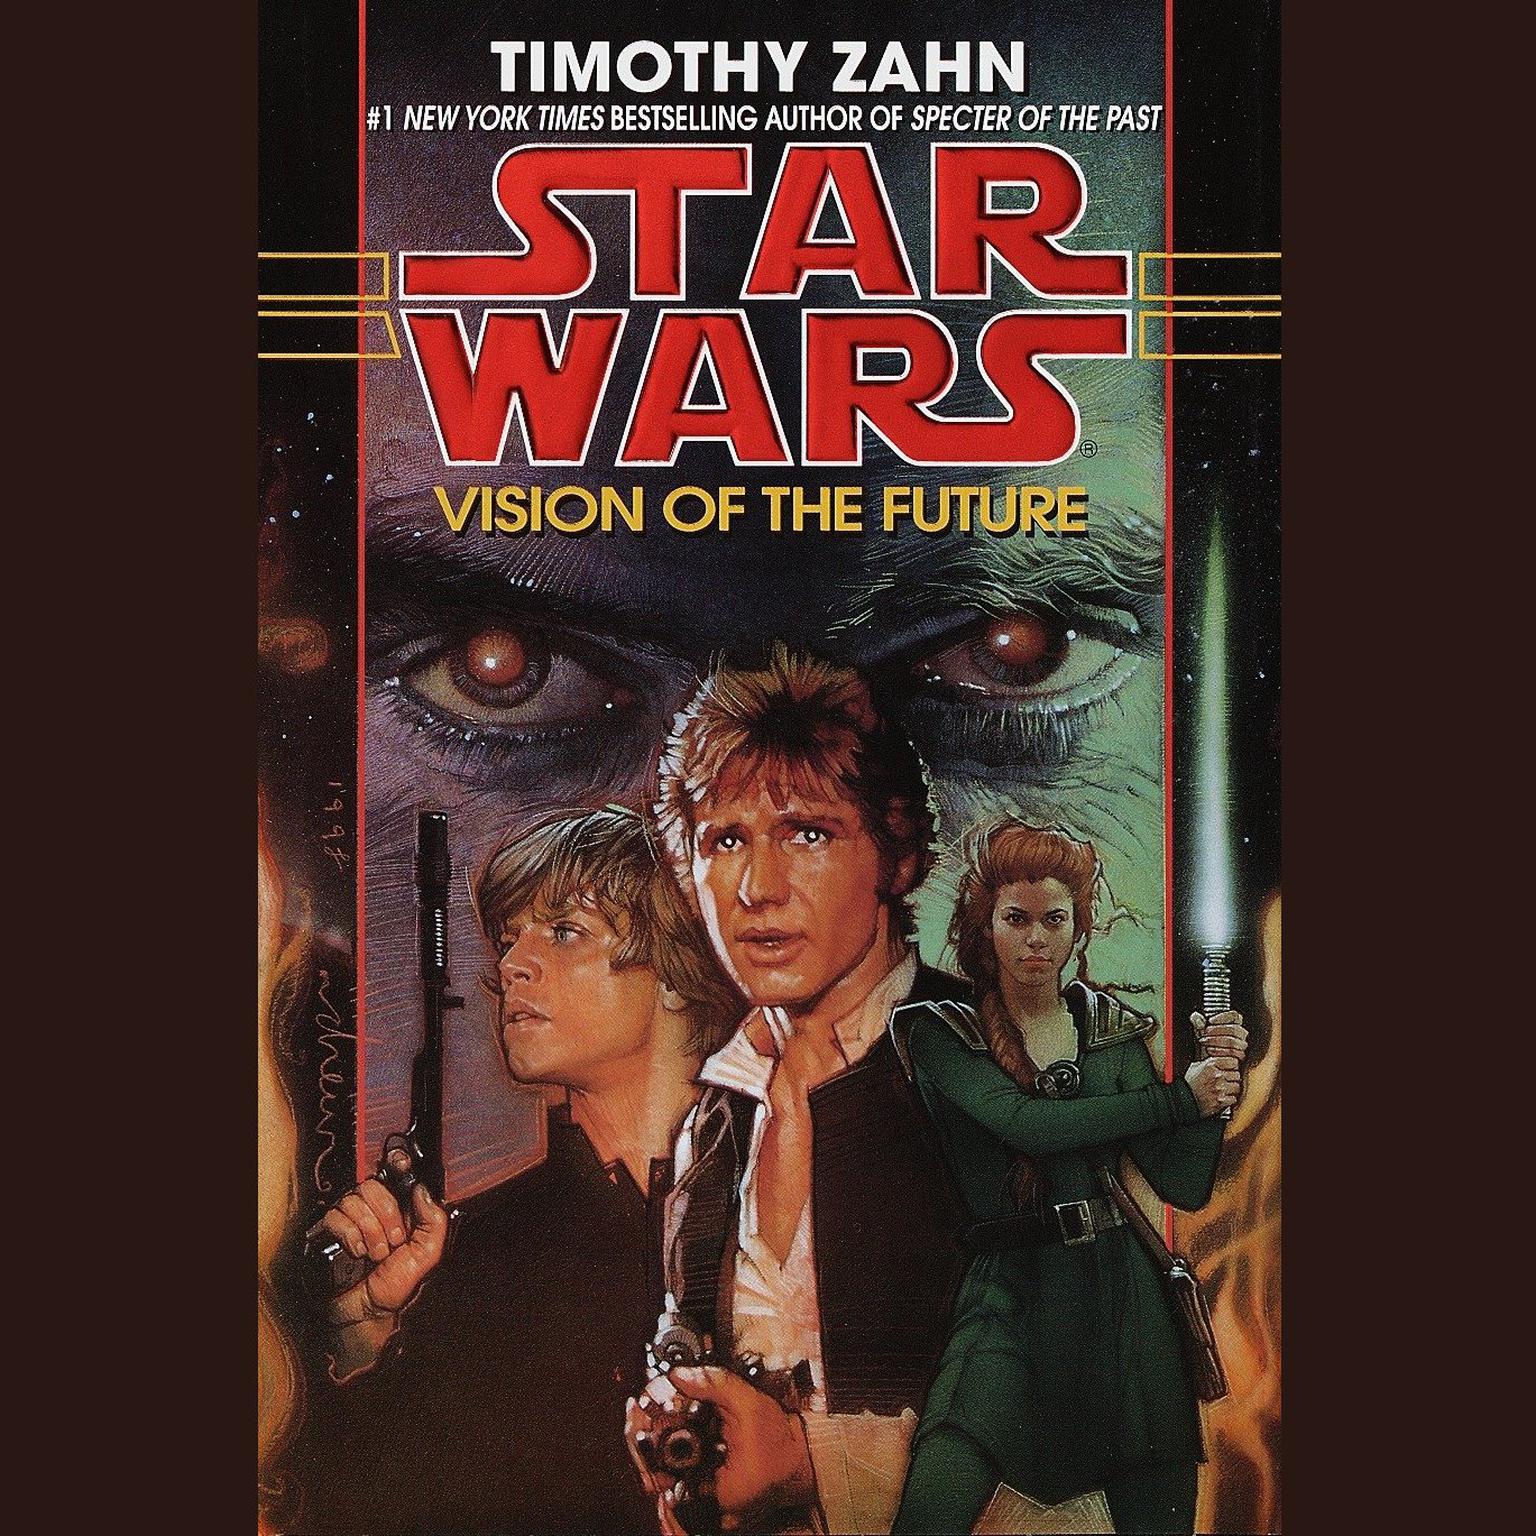 Vision of the Future: Star Wars Legends (The Hand of Thrawn) (Abridged): Book II Audiobook, by Timothy Zahn